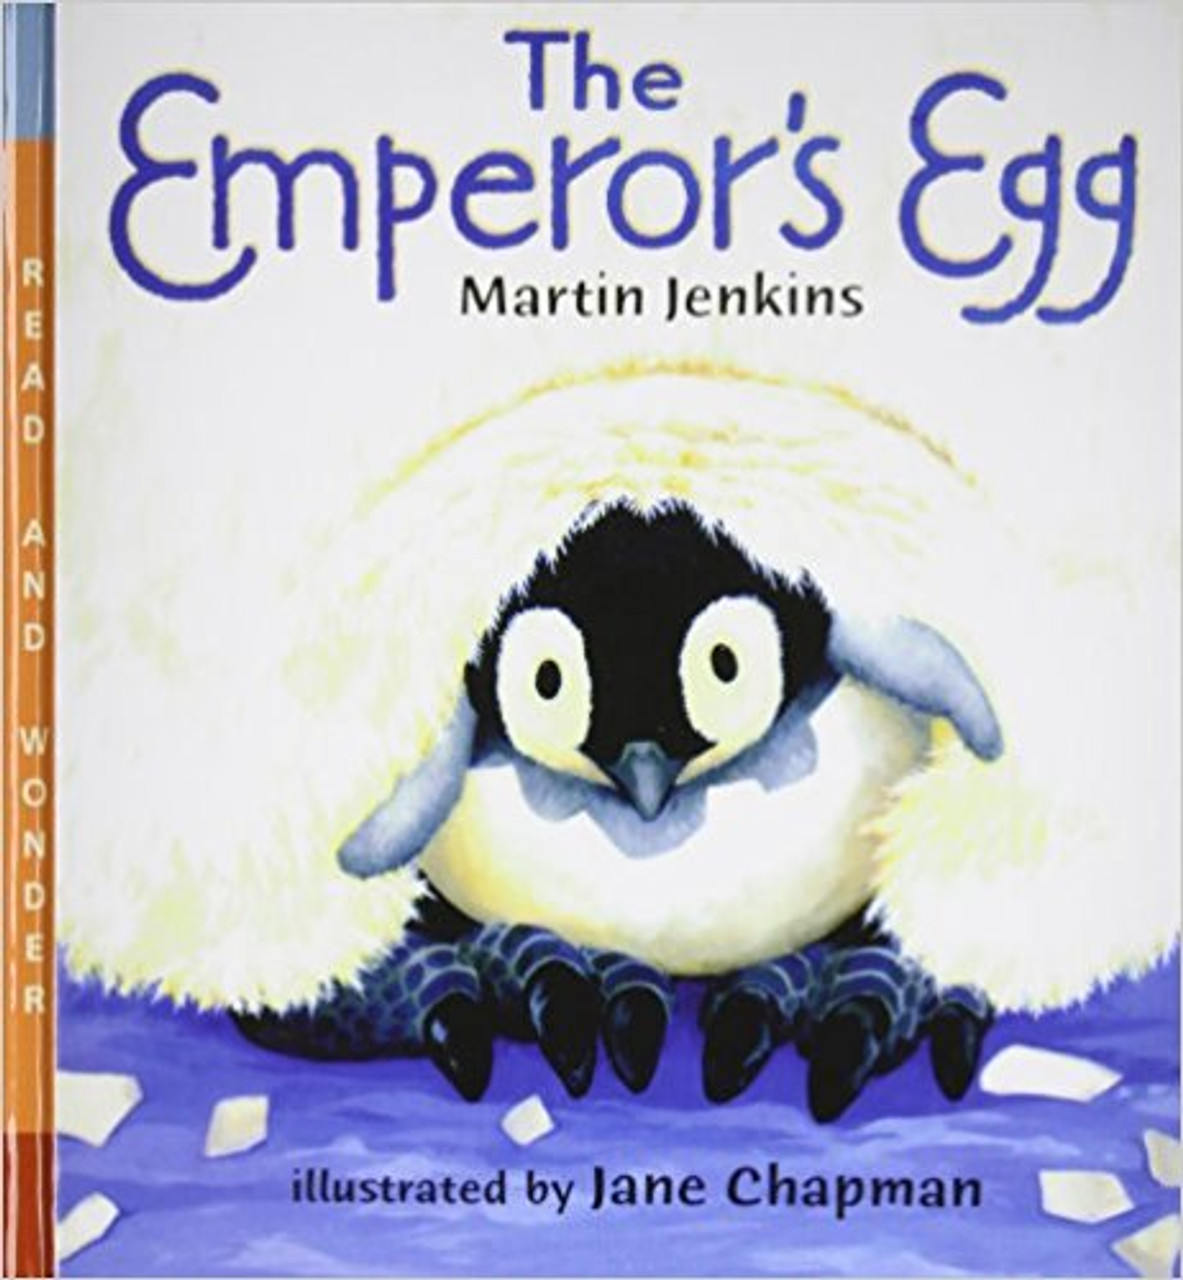 The Emperor's Egg (Paperback) by Martin Jenkins